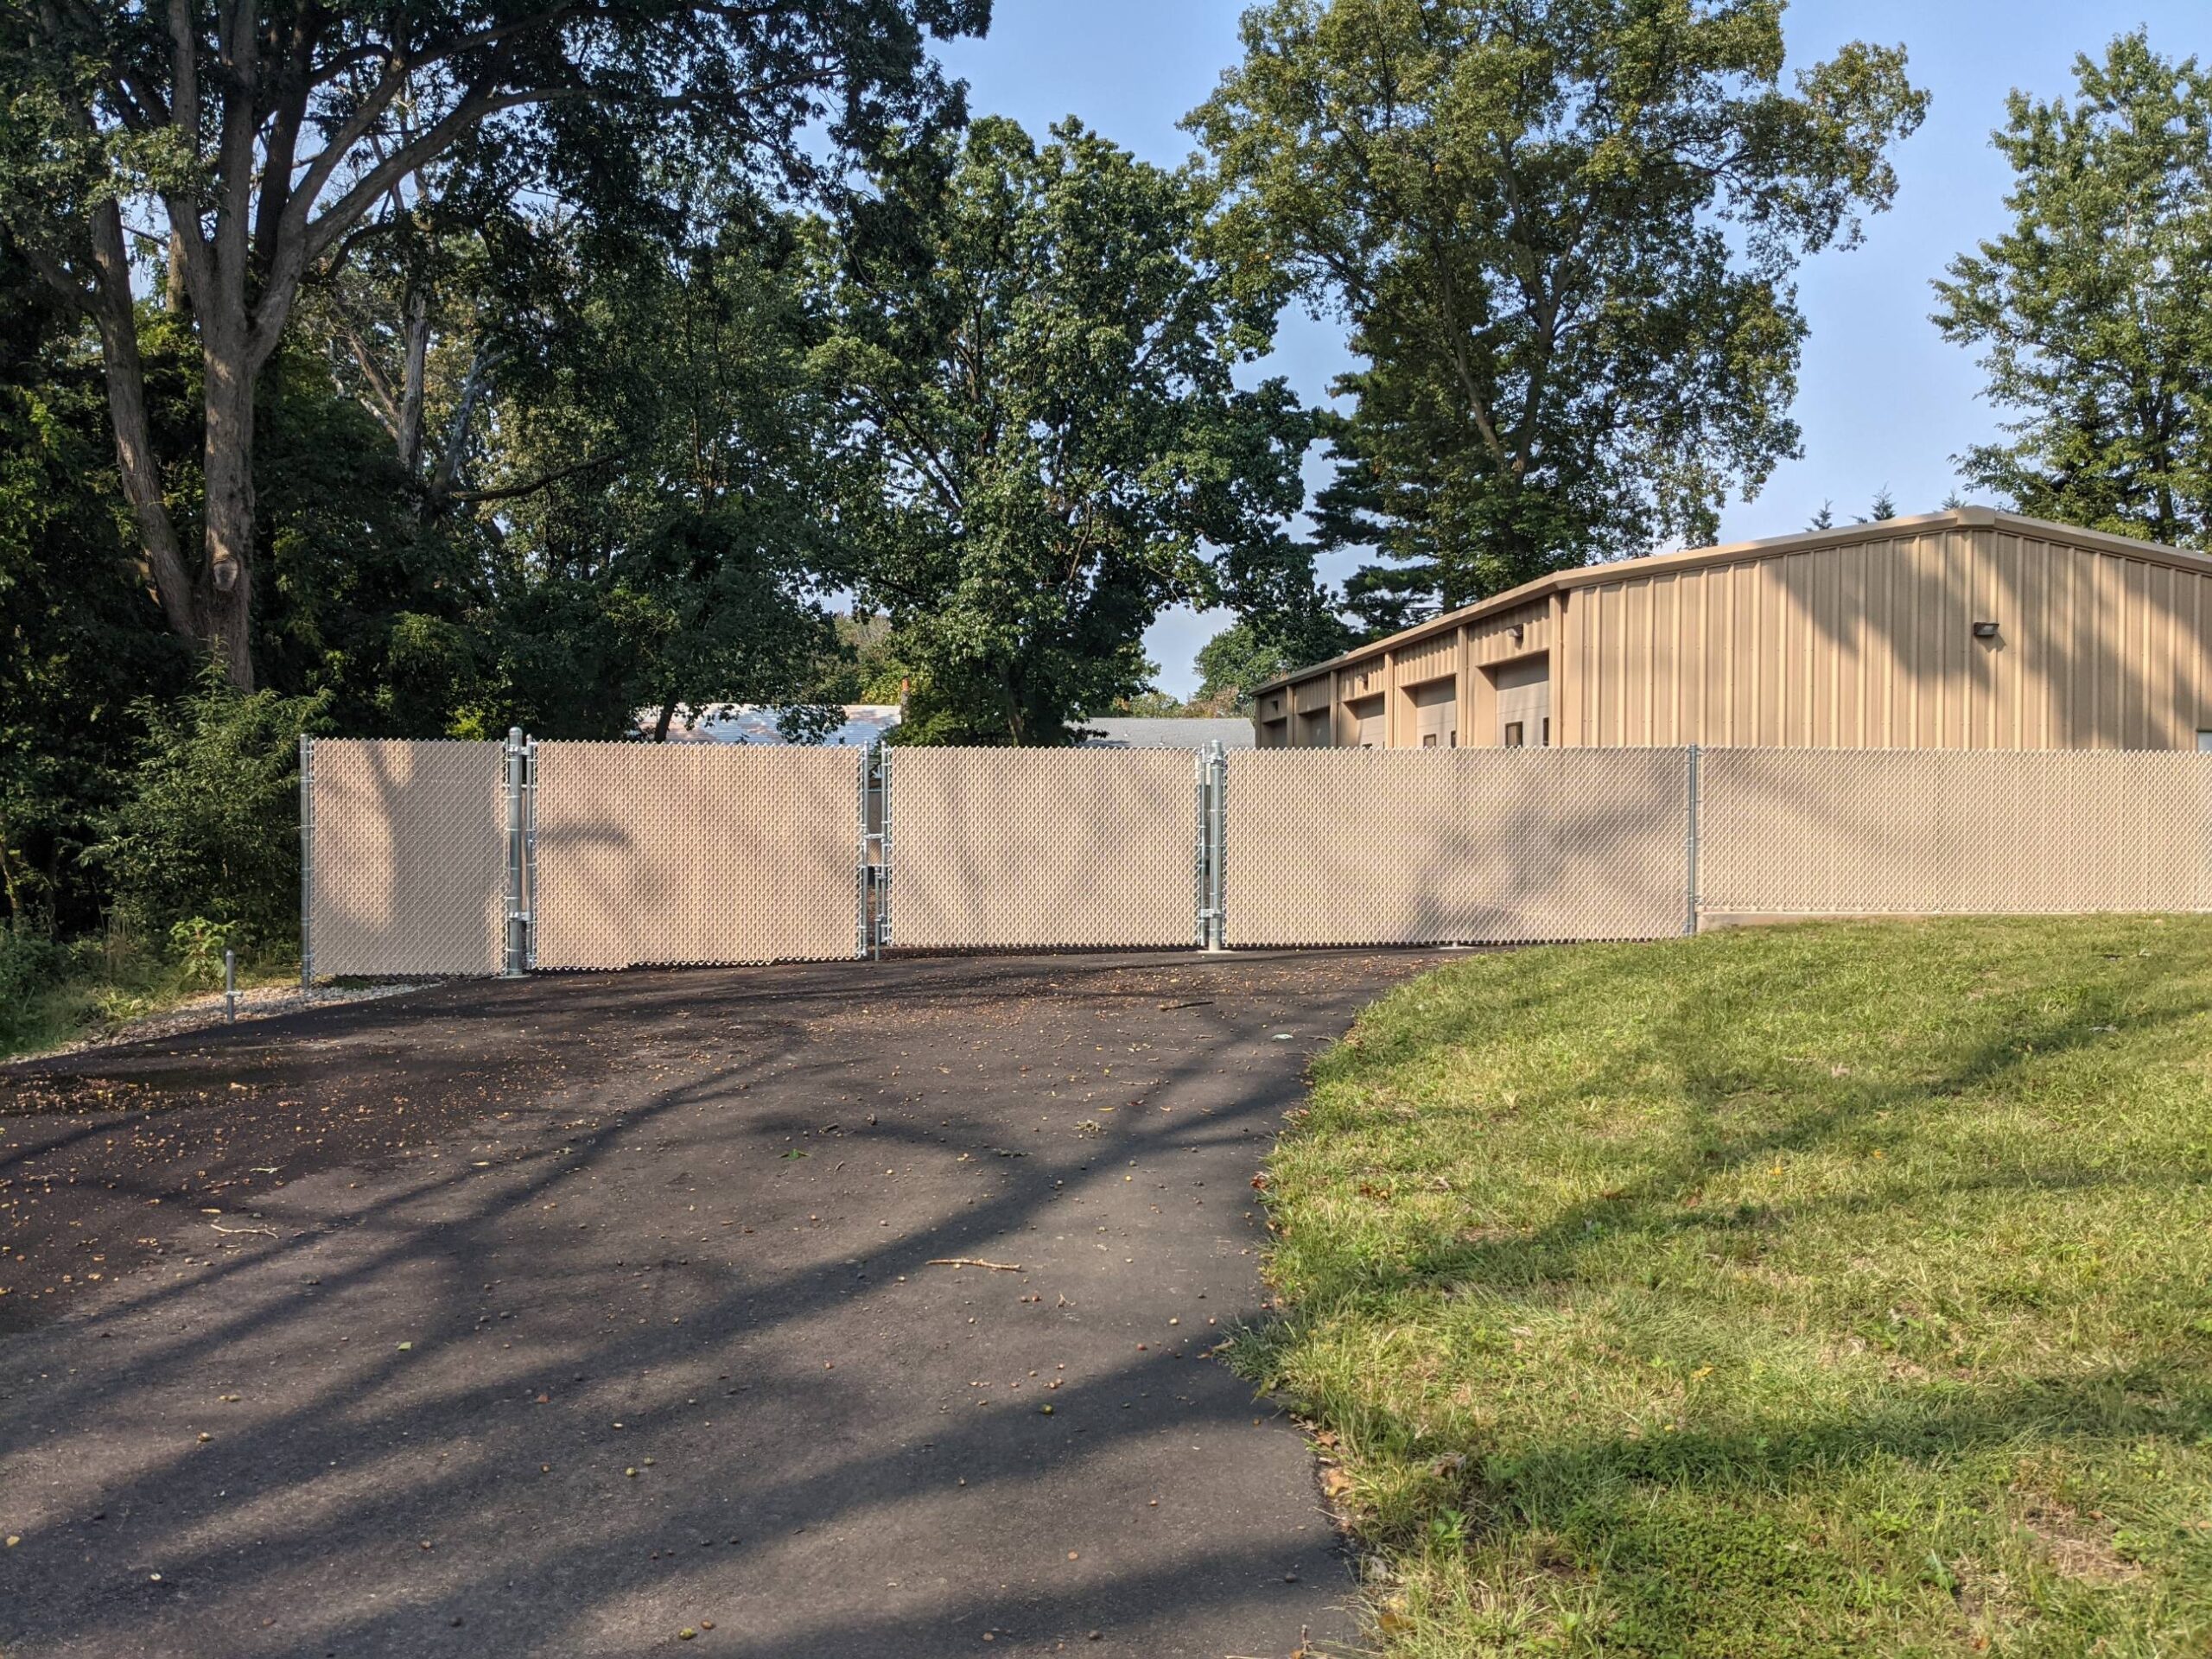 Daly Fence commercial Fence Install